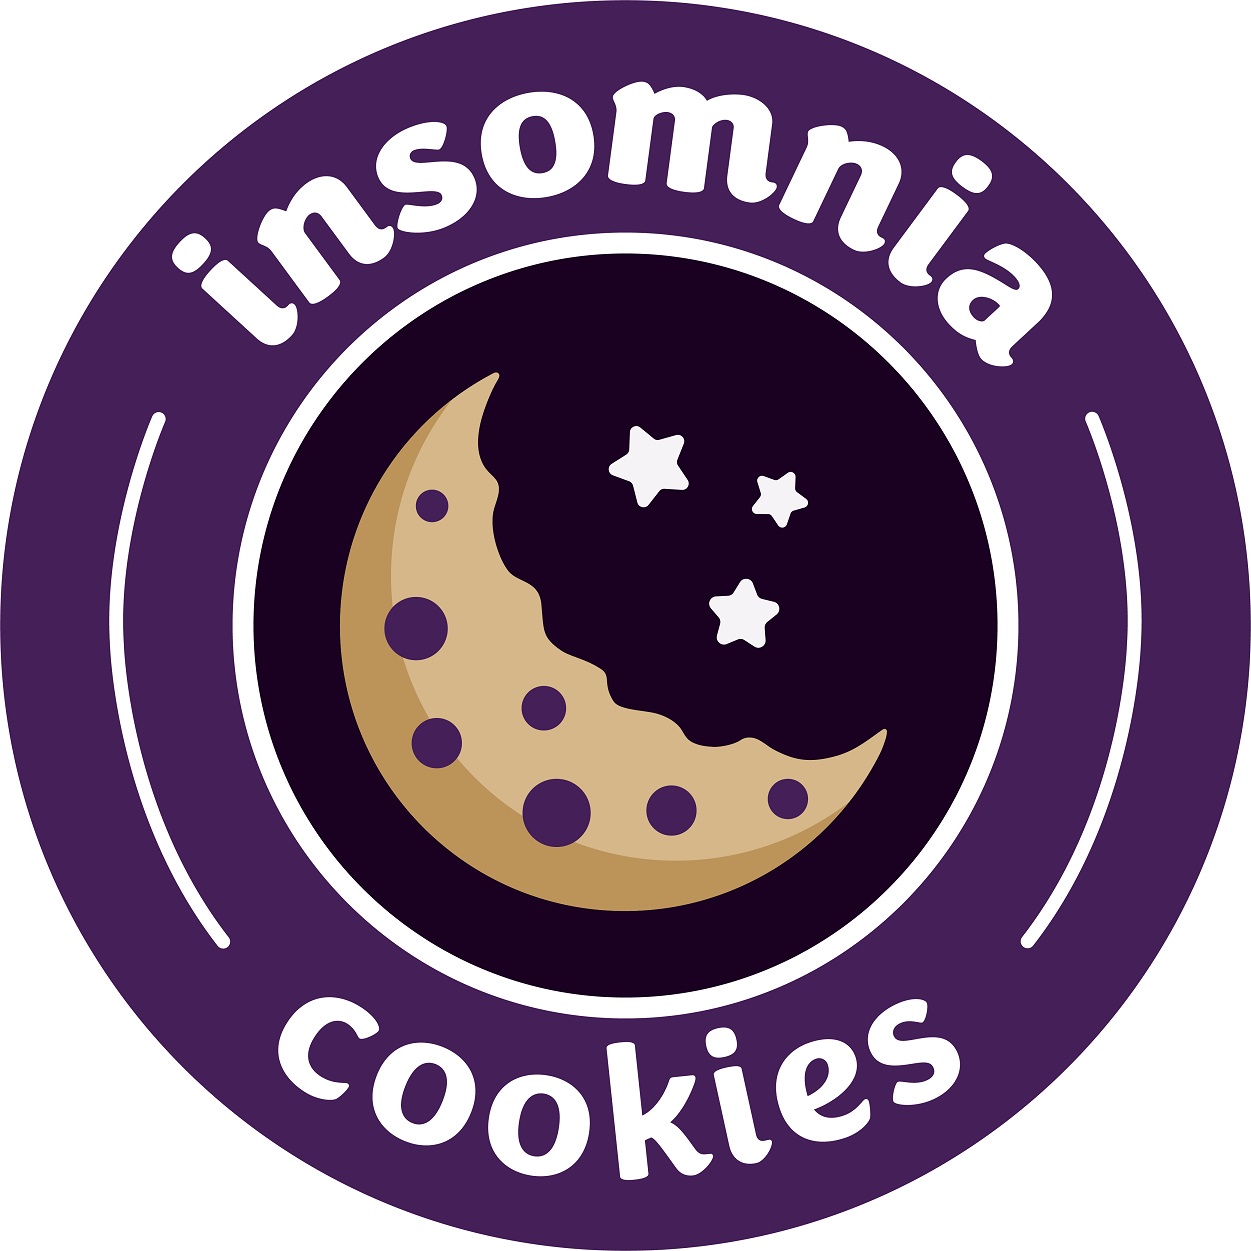 College Press Releases Insomnia Cookies Invites College Students to Its First Ever Global PJ Party